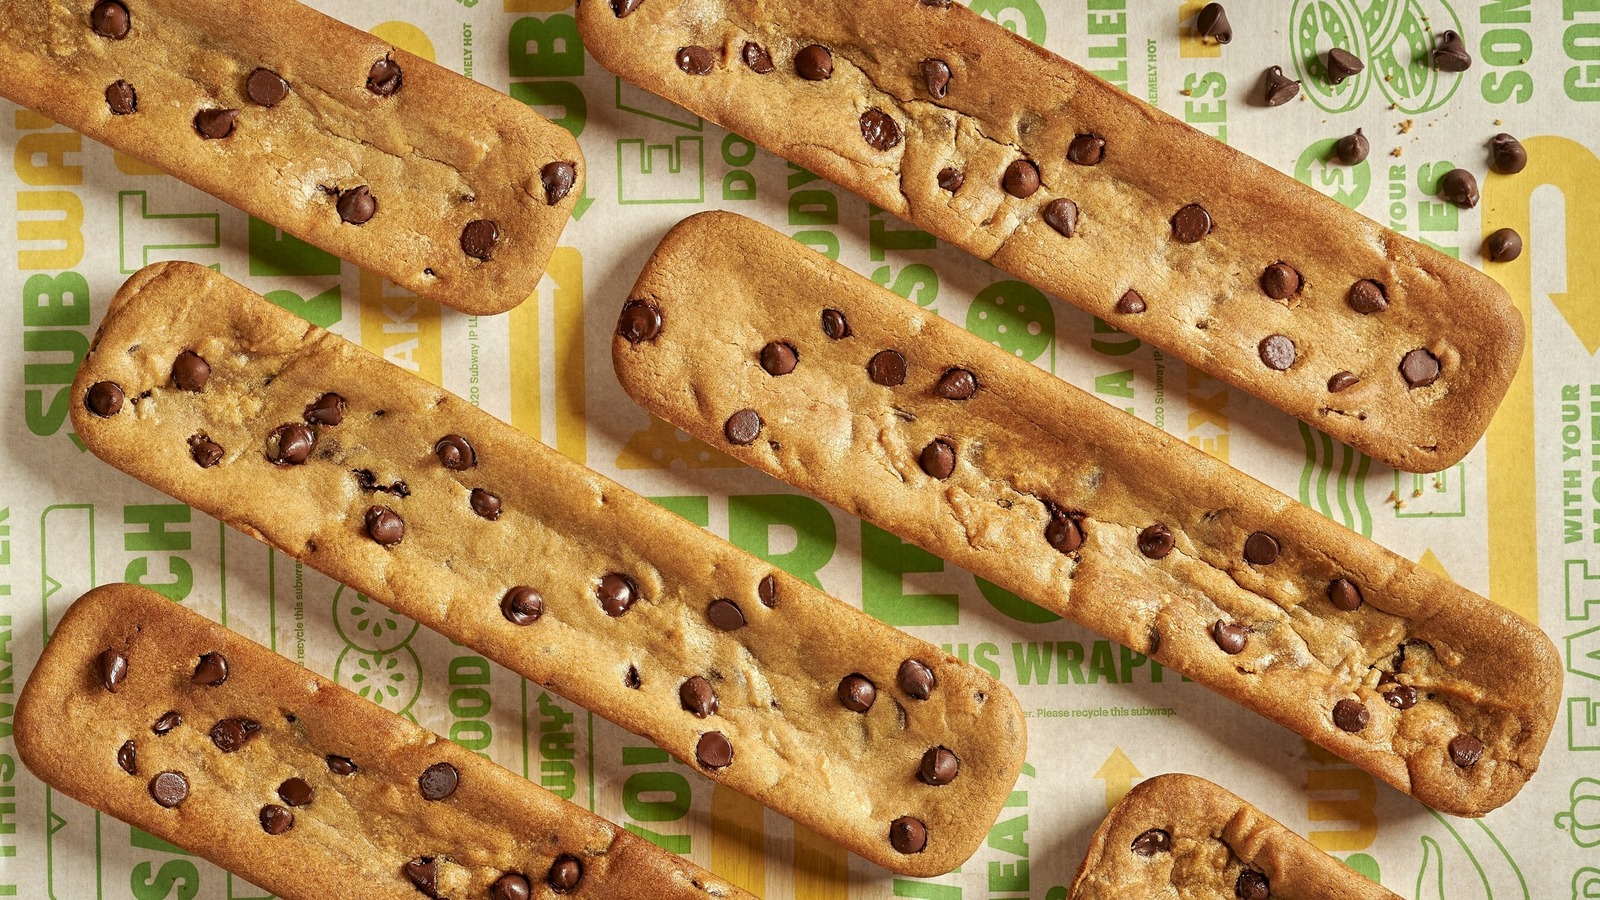 Subway Adds A Footlong Cookie At Some Locations For National Cookie Day